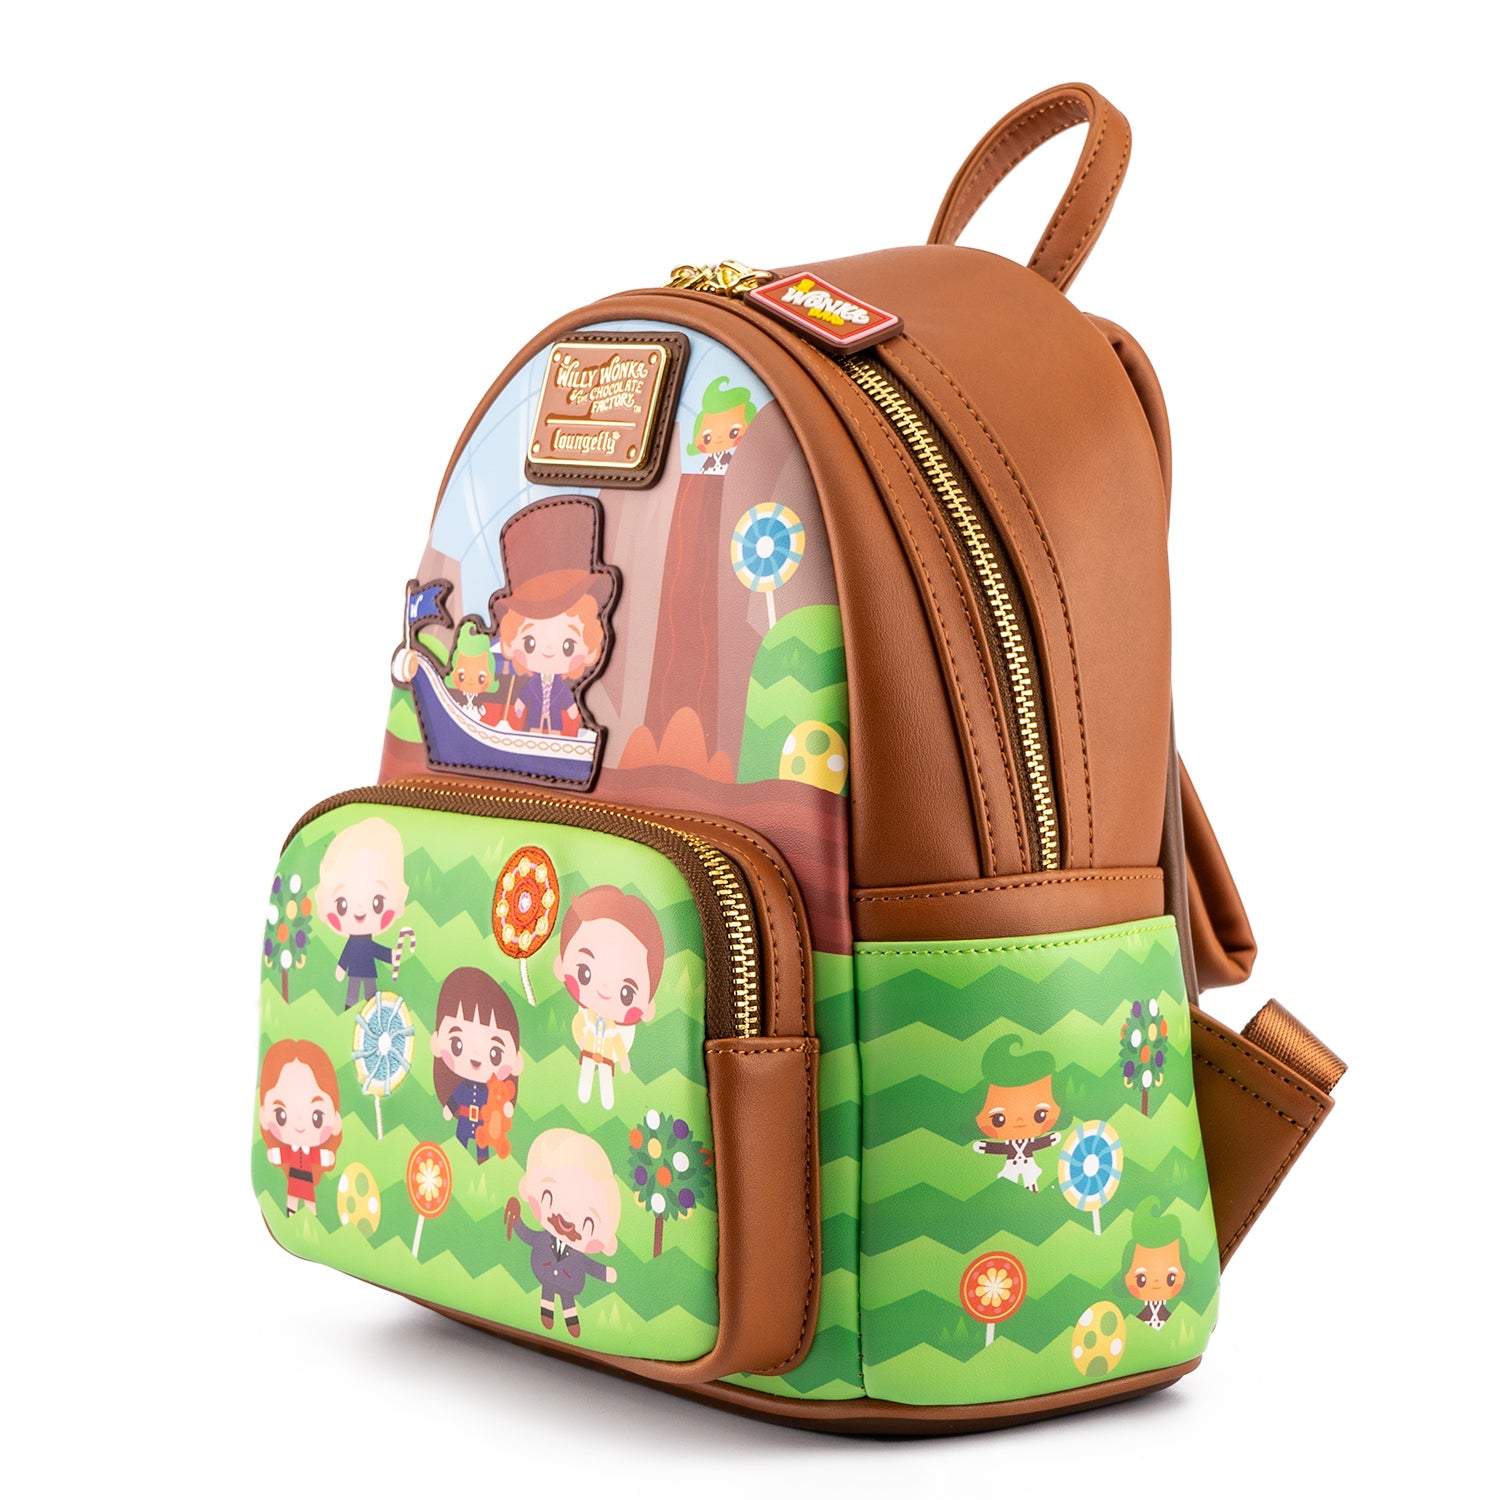 Willy Wonka | Charlie and The Chocolate Factory 50th Anniversary Mini Backpack